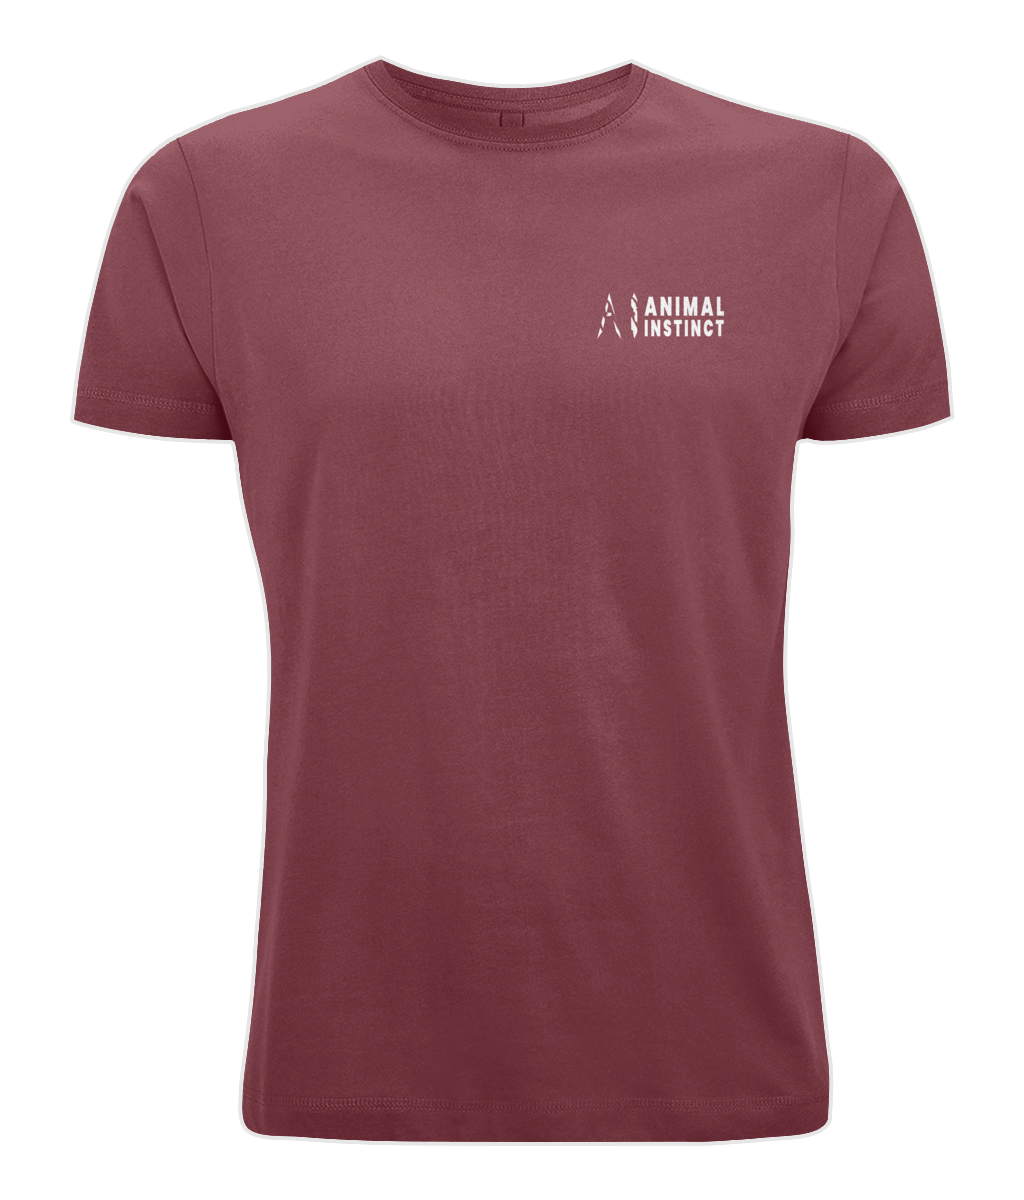 Mens burgundy Casual Cotton T-Shirt with White AI logo and Animal Instinct in White writing on the left chest